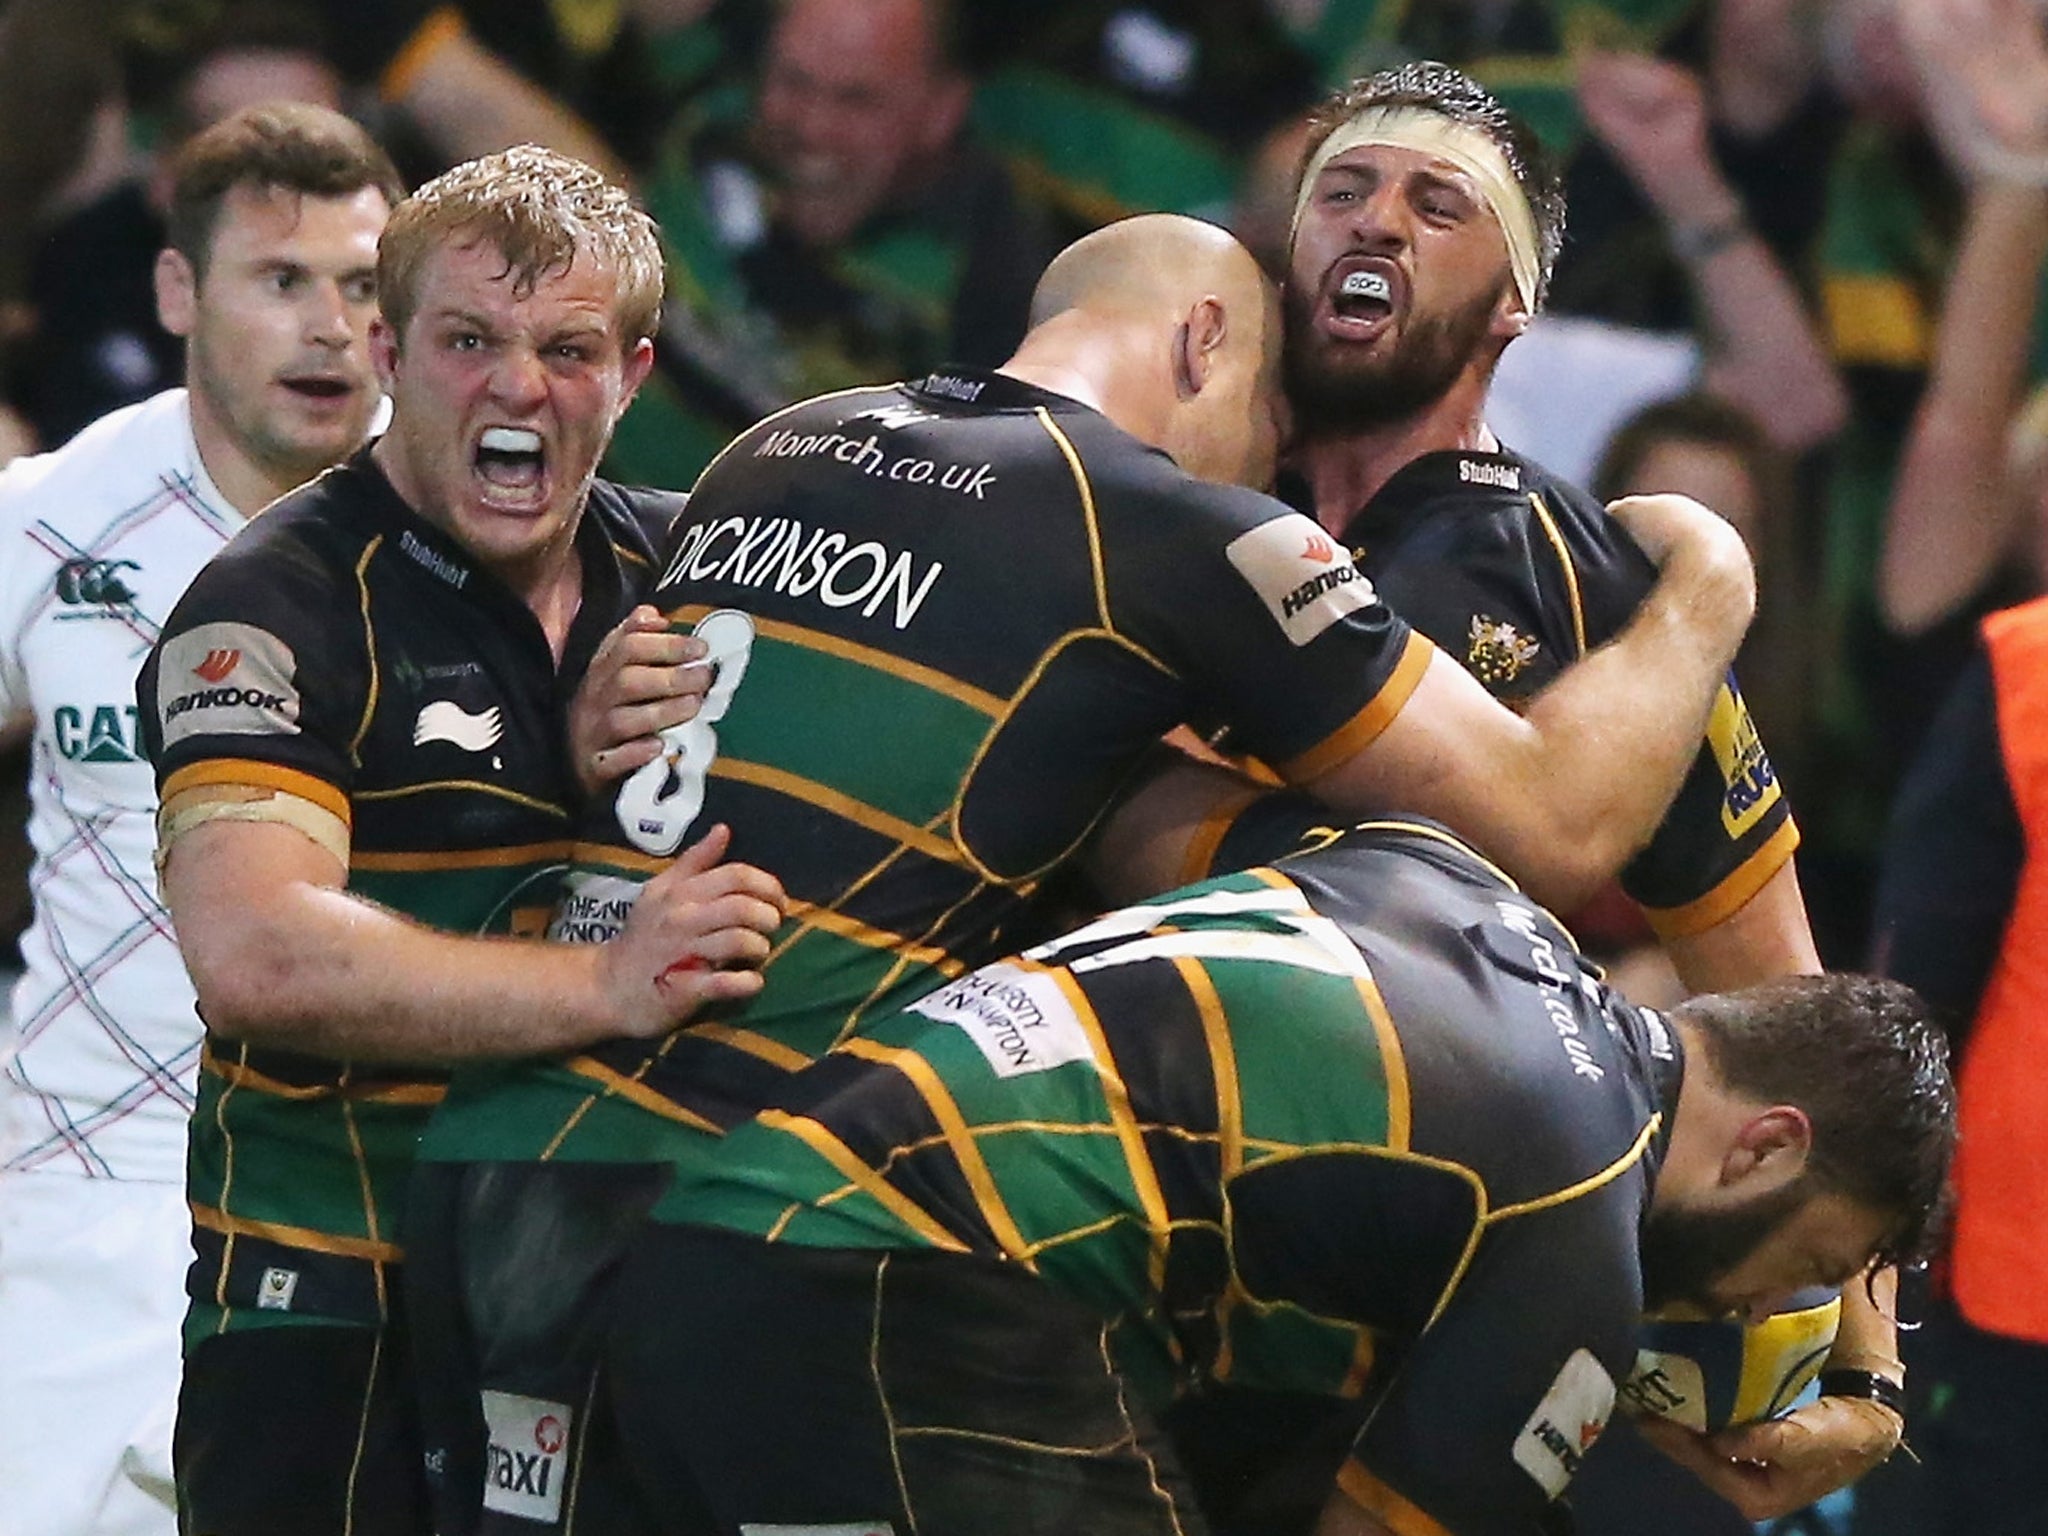 Tom Wood celebrates his match-wining try in Northampton's 21-20 win over Leicester